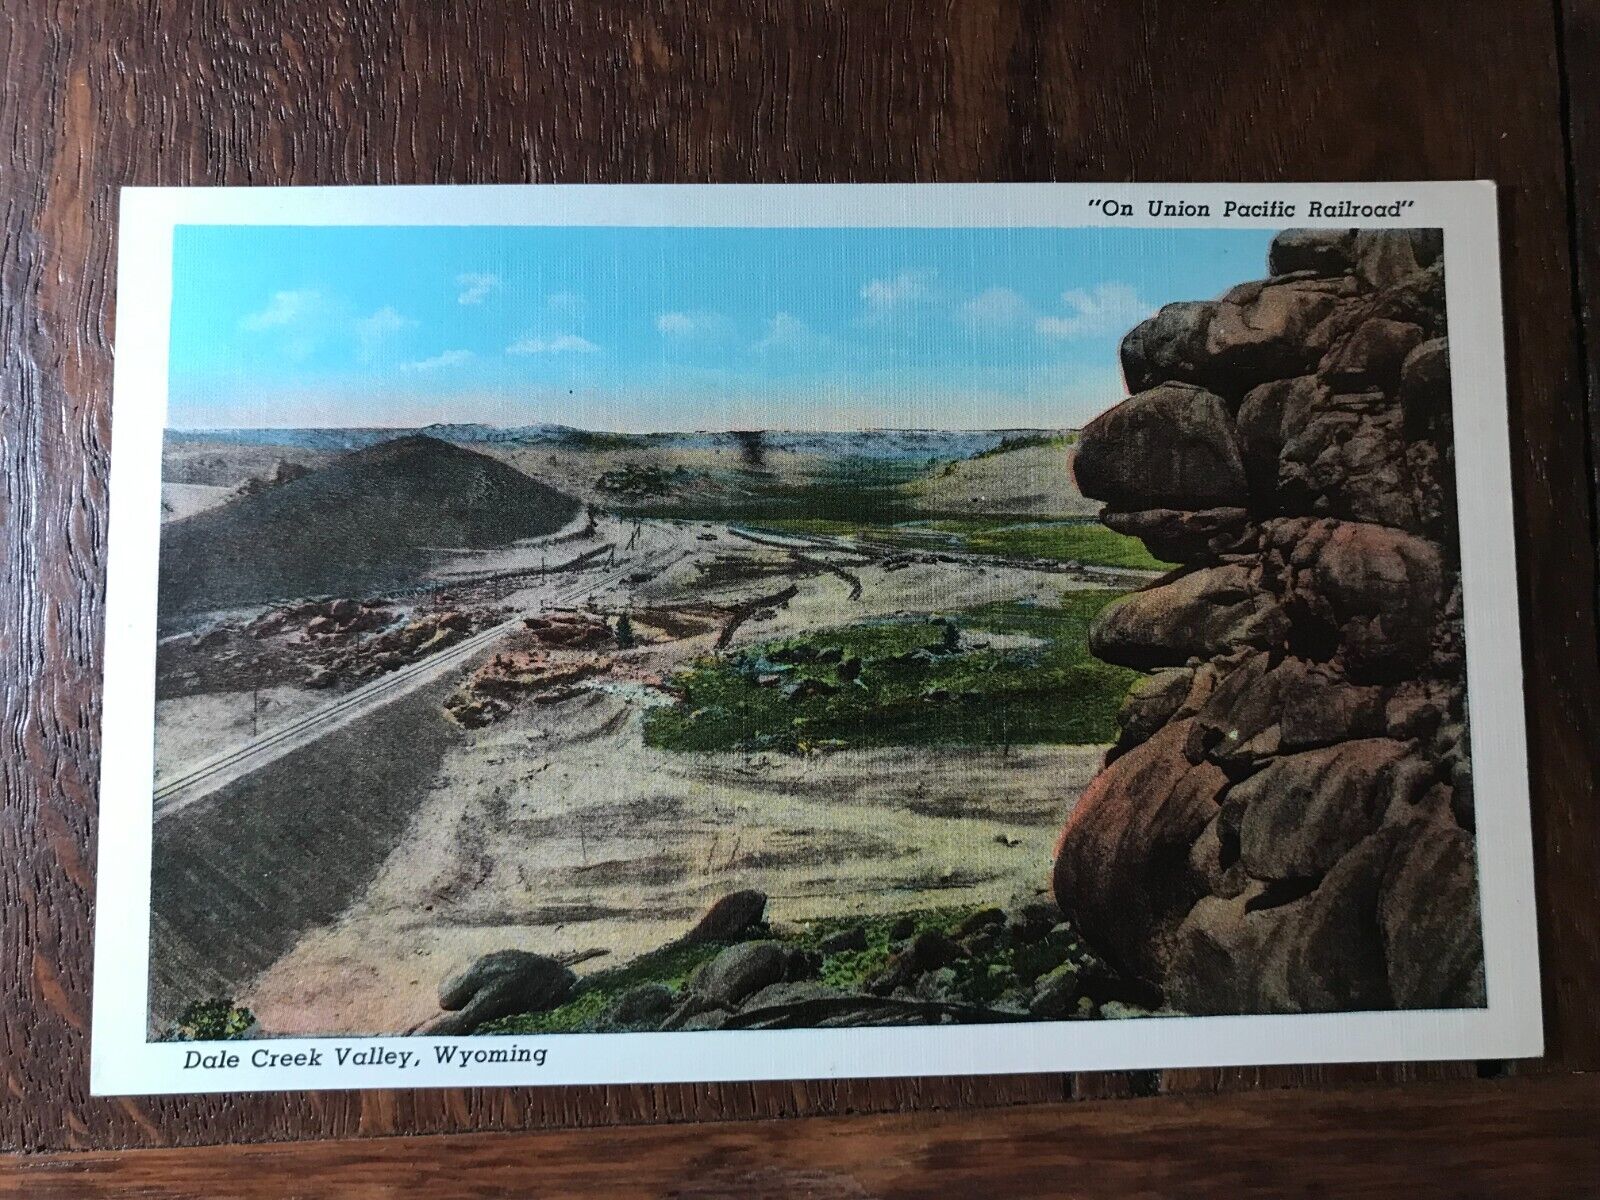 Dale Creek Valley Wyoming On Union Pacific Railroad Postcard